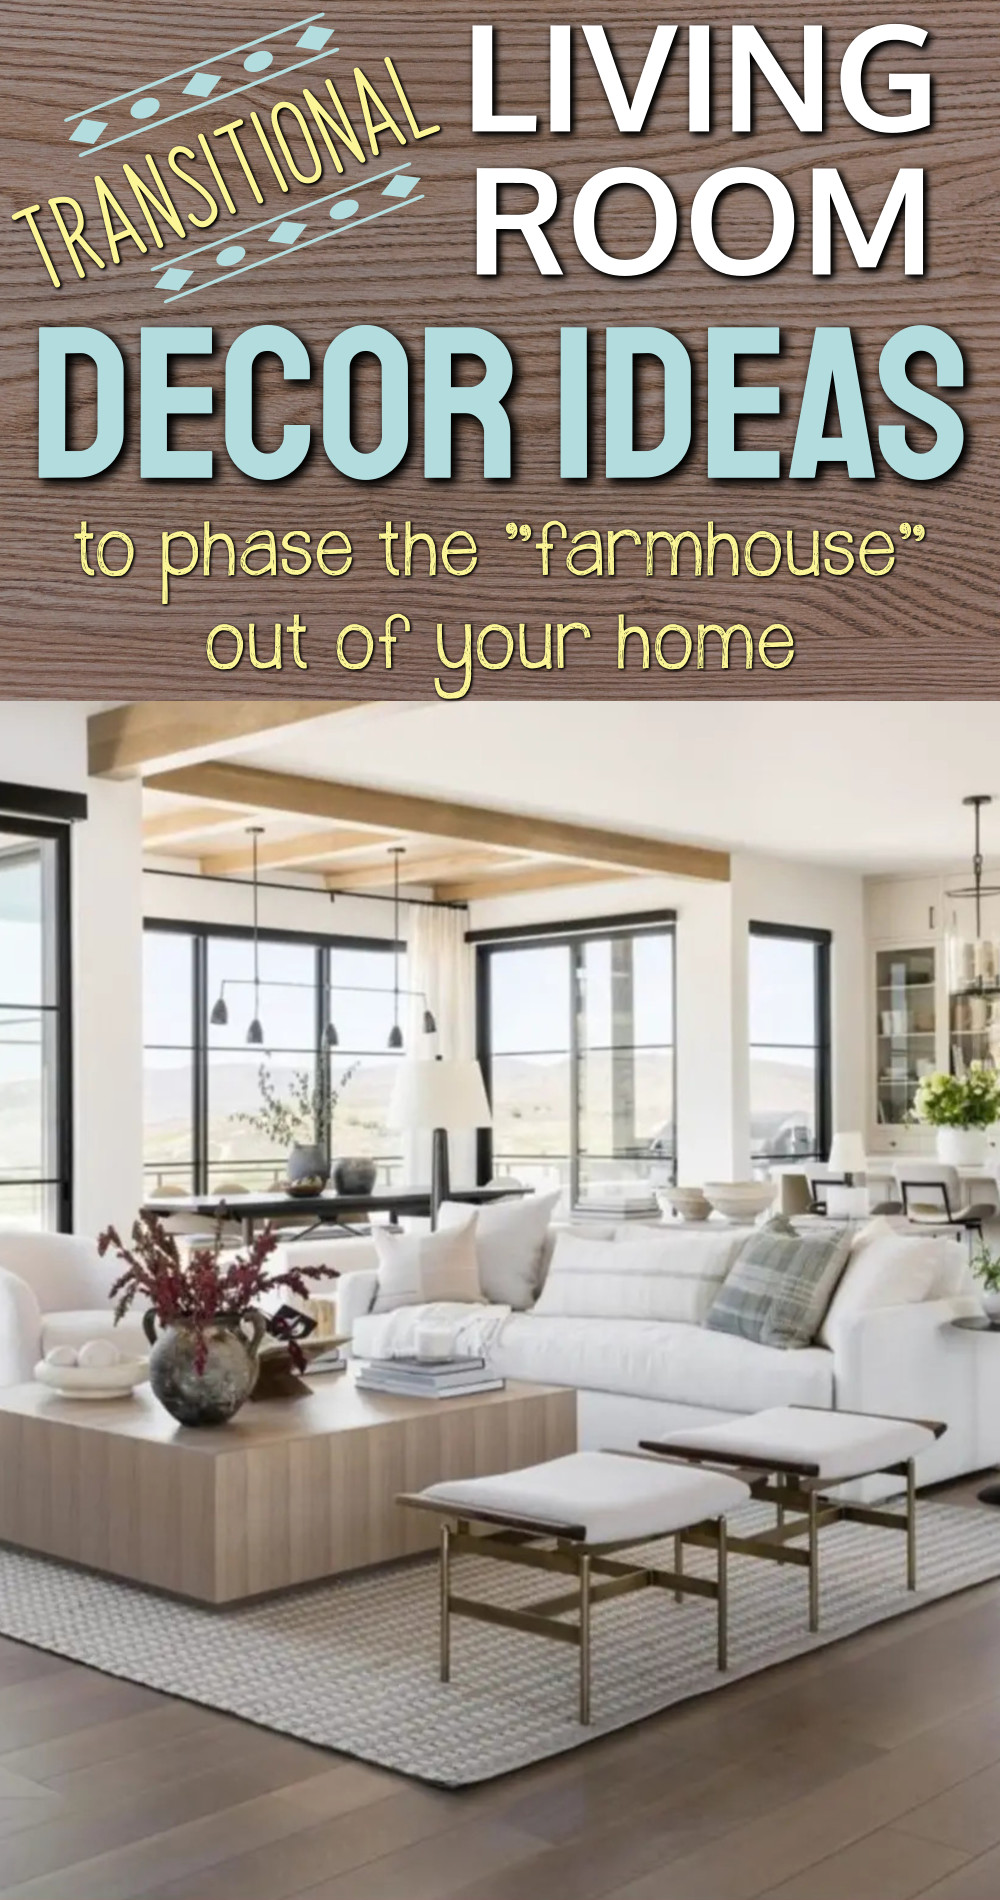 transitional living room decor ideas to phase out farmhouse style